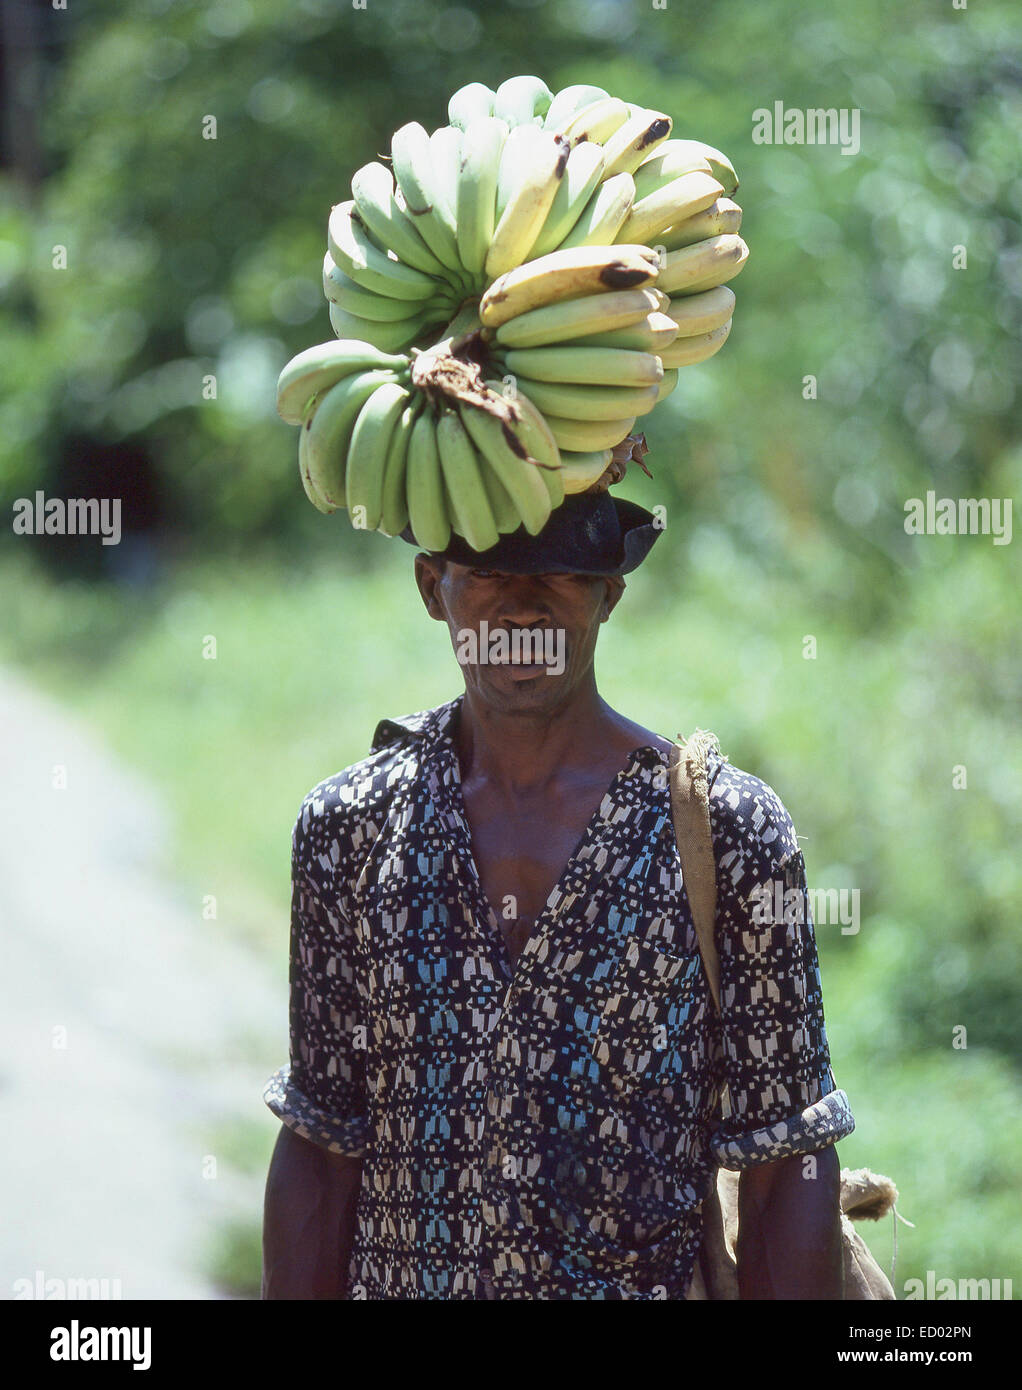 Local man carrying a bunch of bananas on his head, Saint Lucia, Lesser Antilles, Caribbean Stock Photo